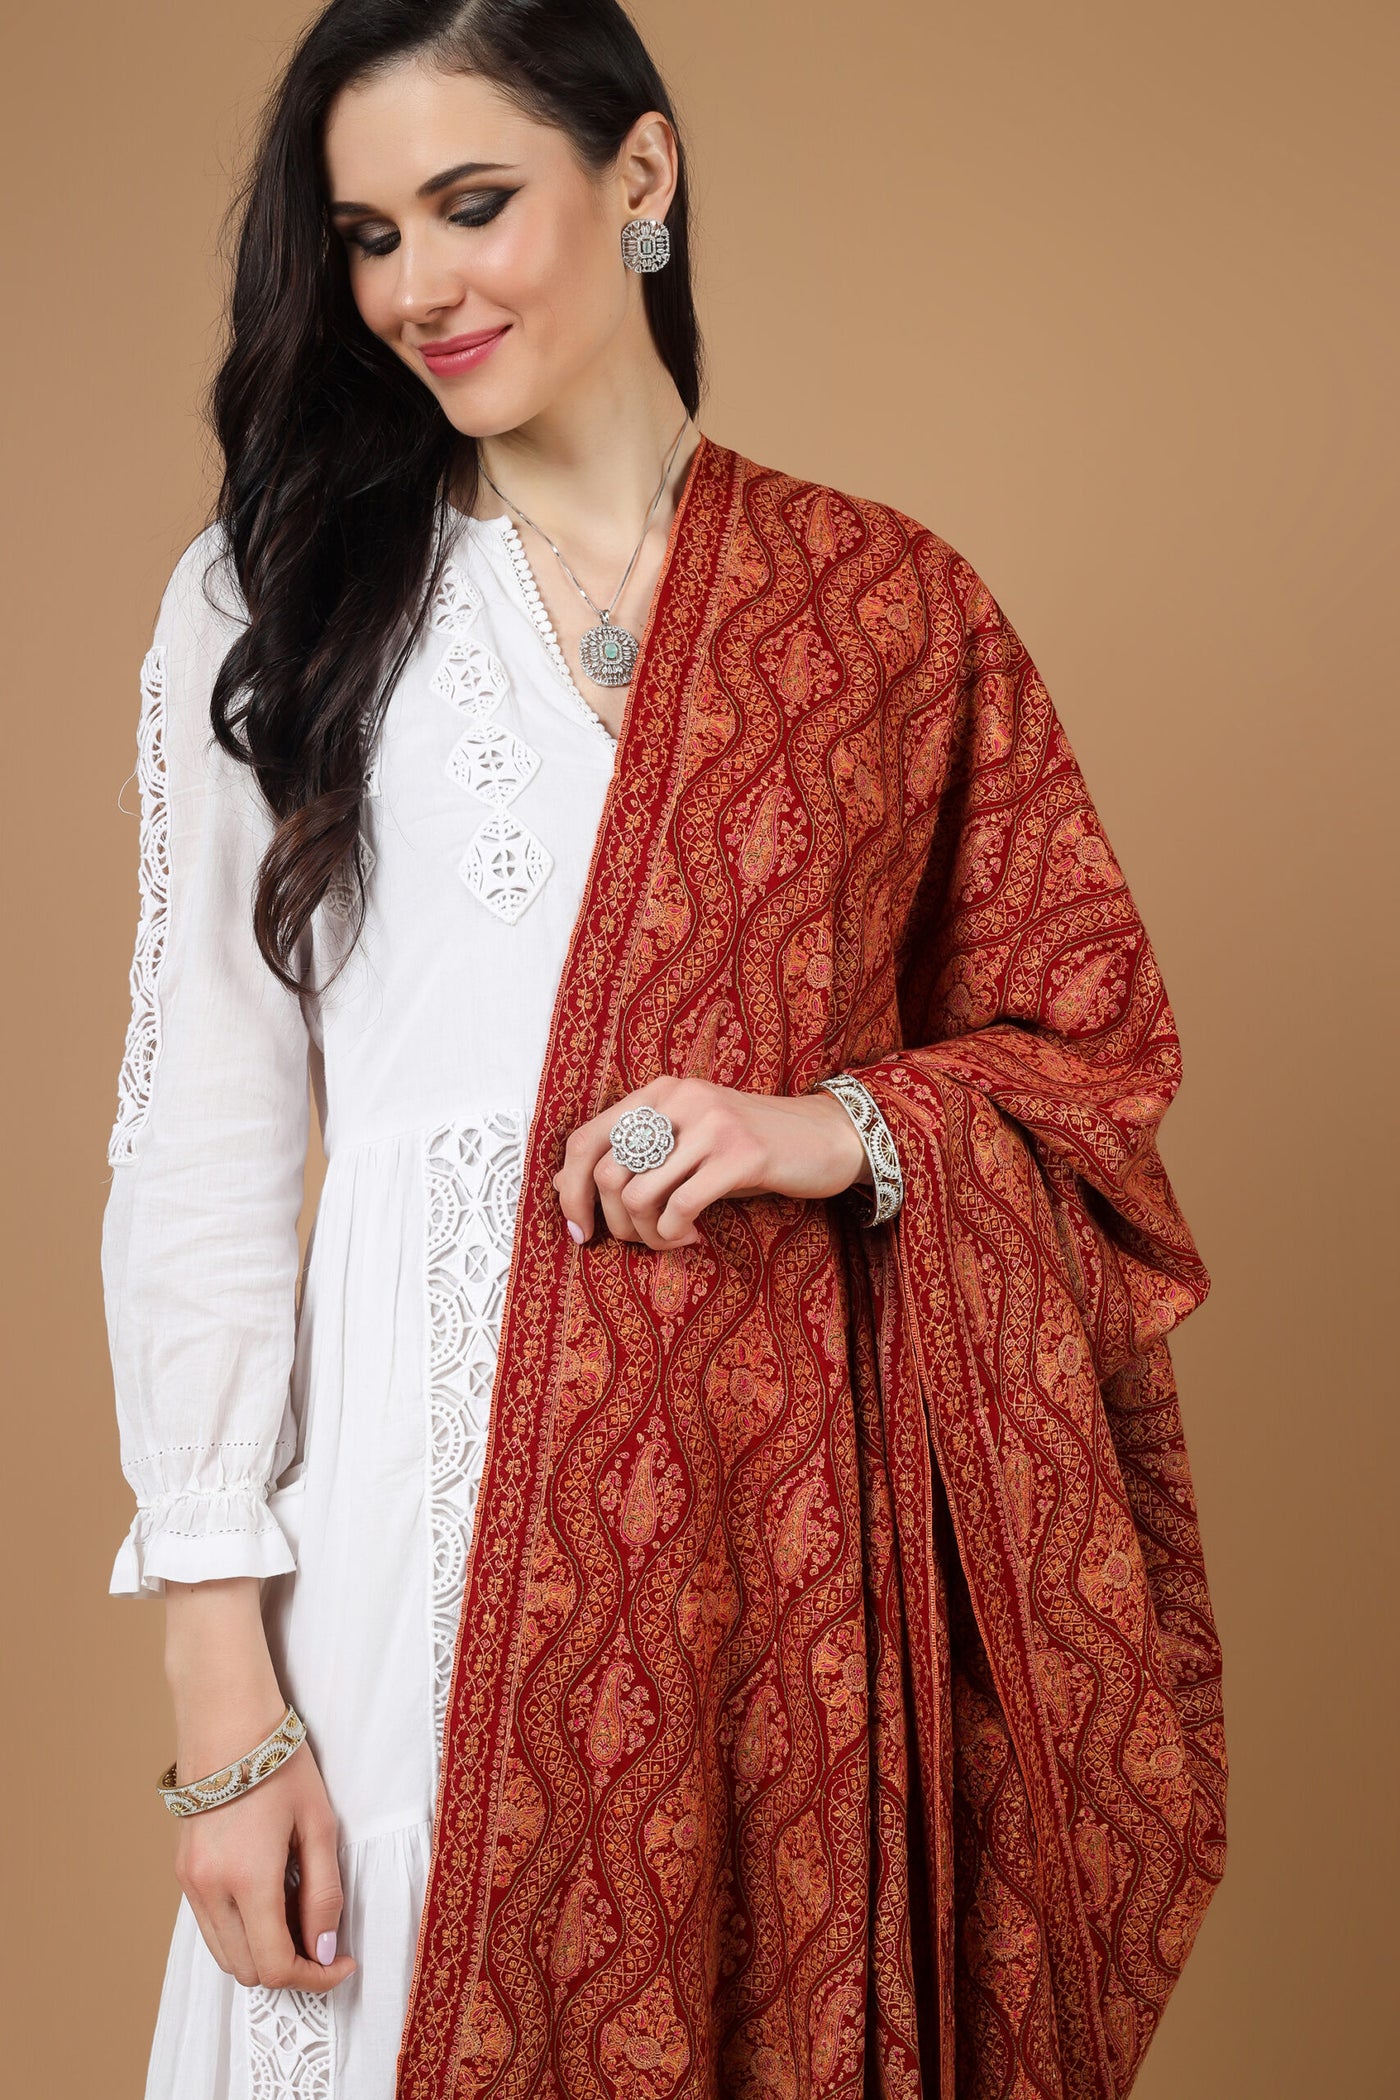  A beautiful bright Maroon colored Pashmina is featured by intricate Sozni across its surface called the Jama pattern giving it a contemporary edge. 